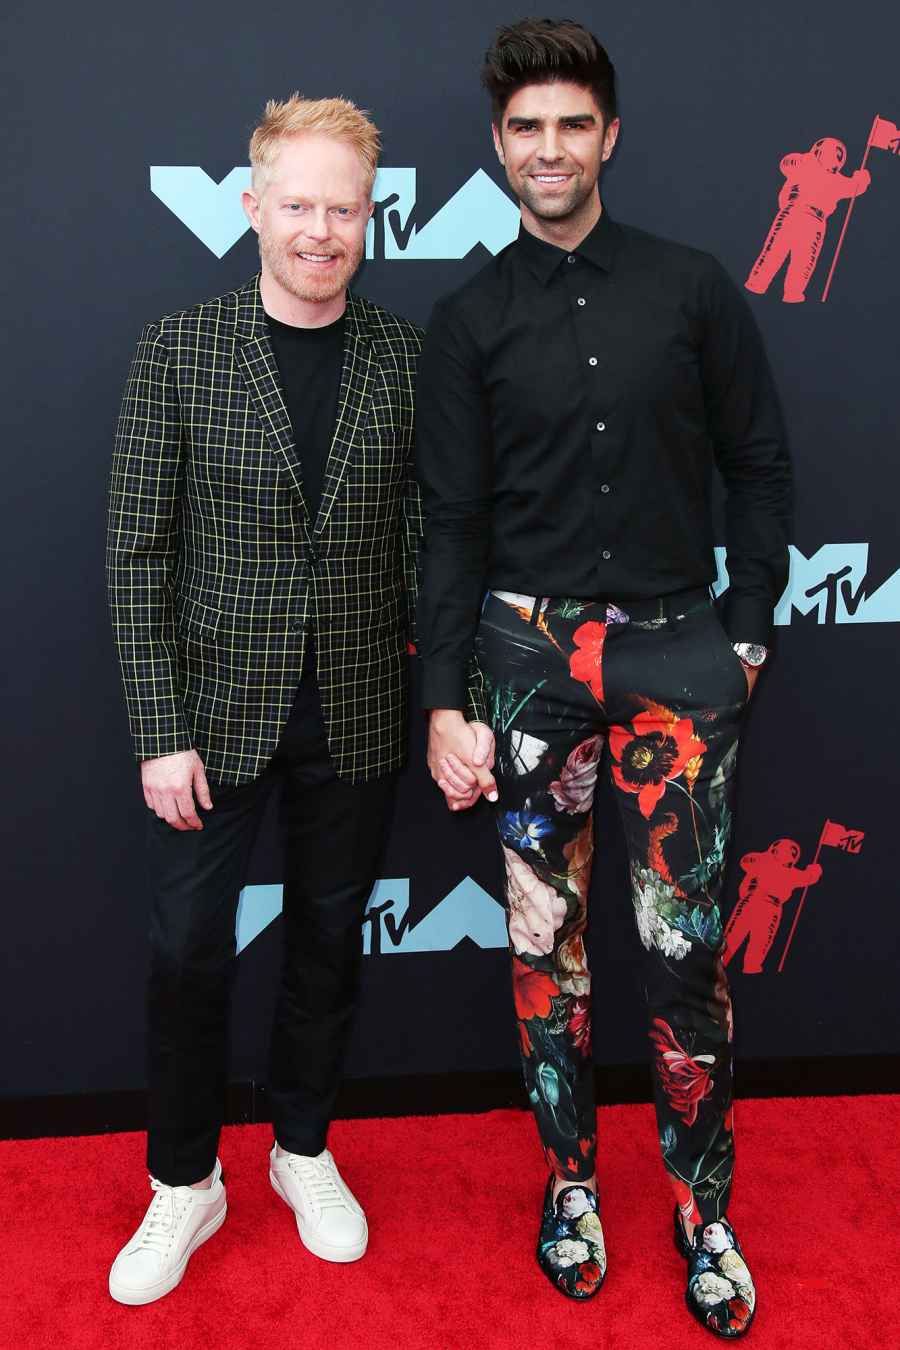 Jesse Tyler Ferguson and Justin Mikita Hottest Couples at the VMAs 2019